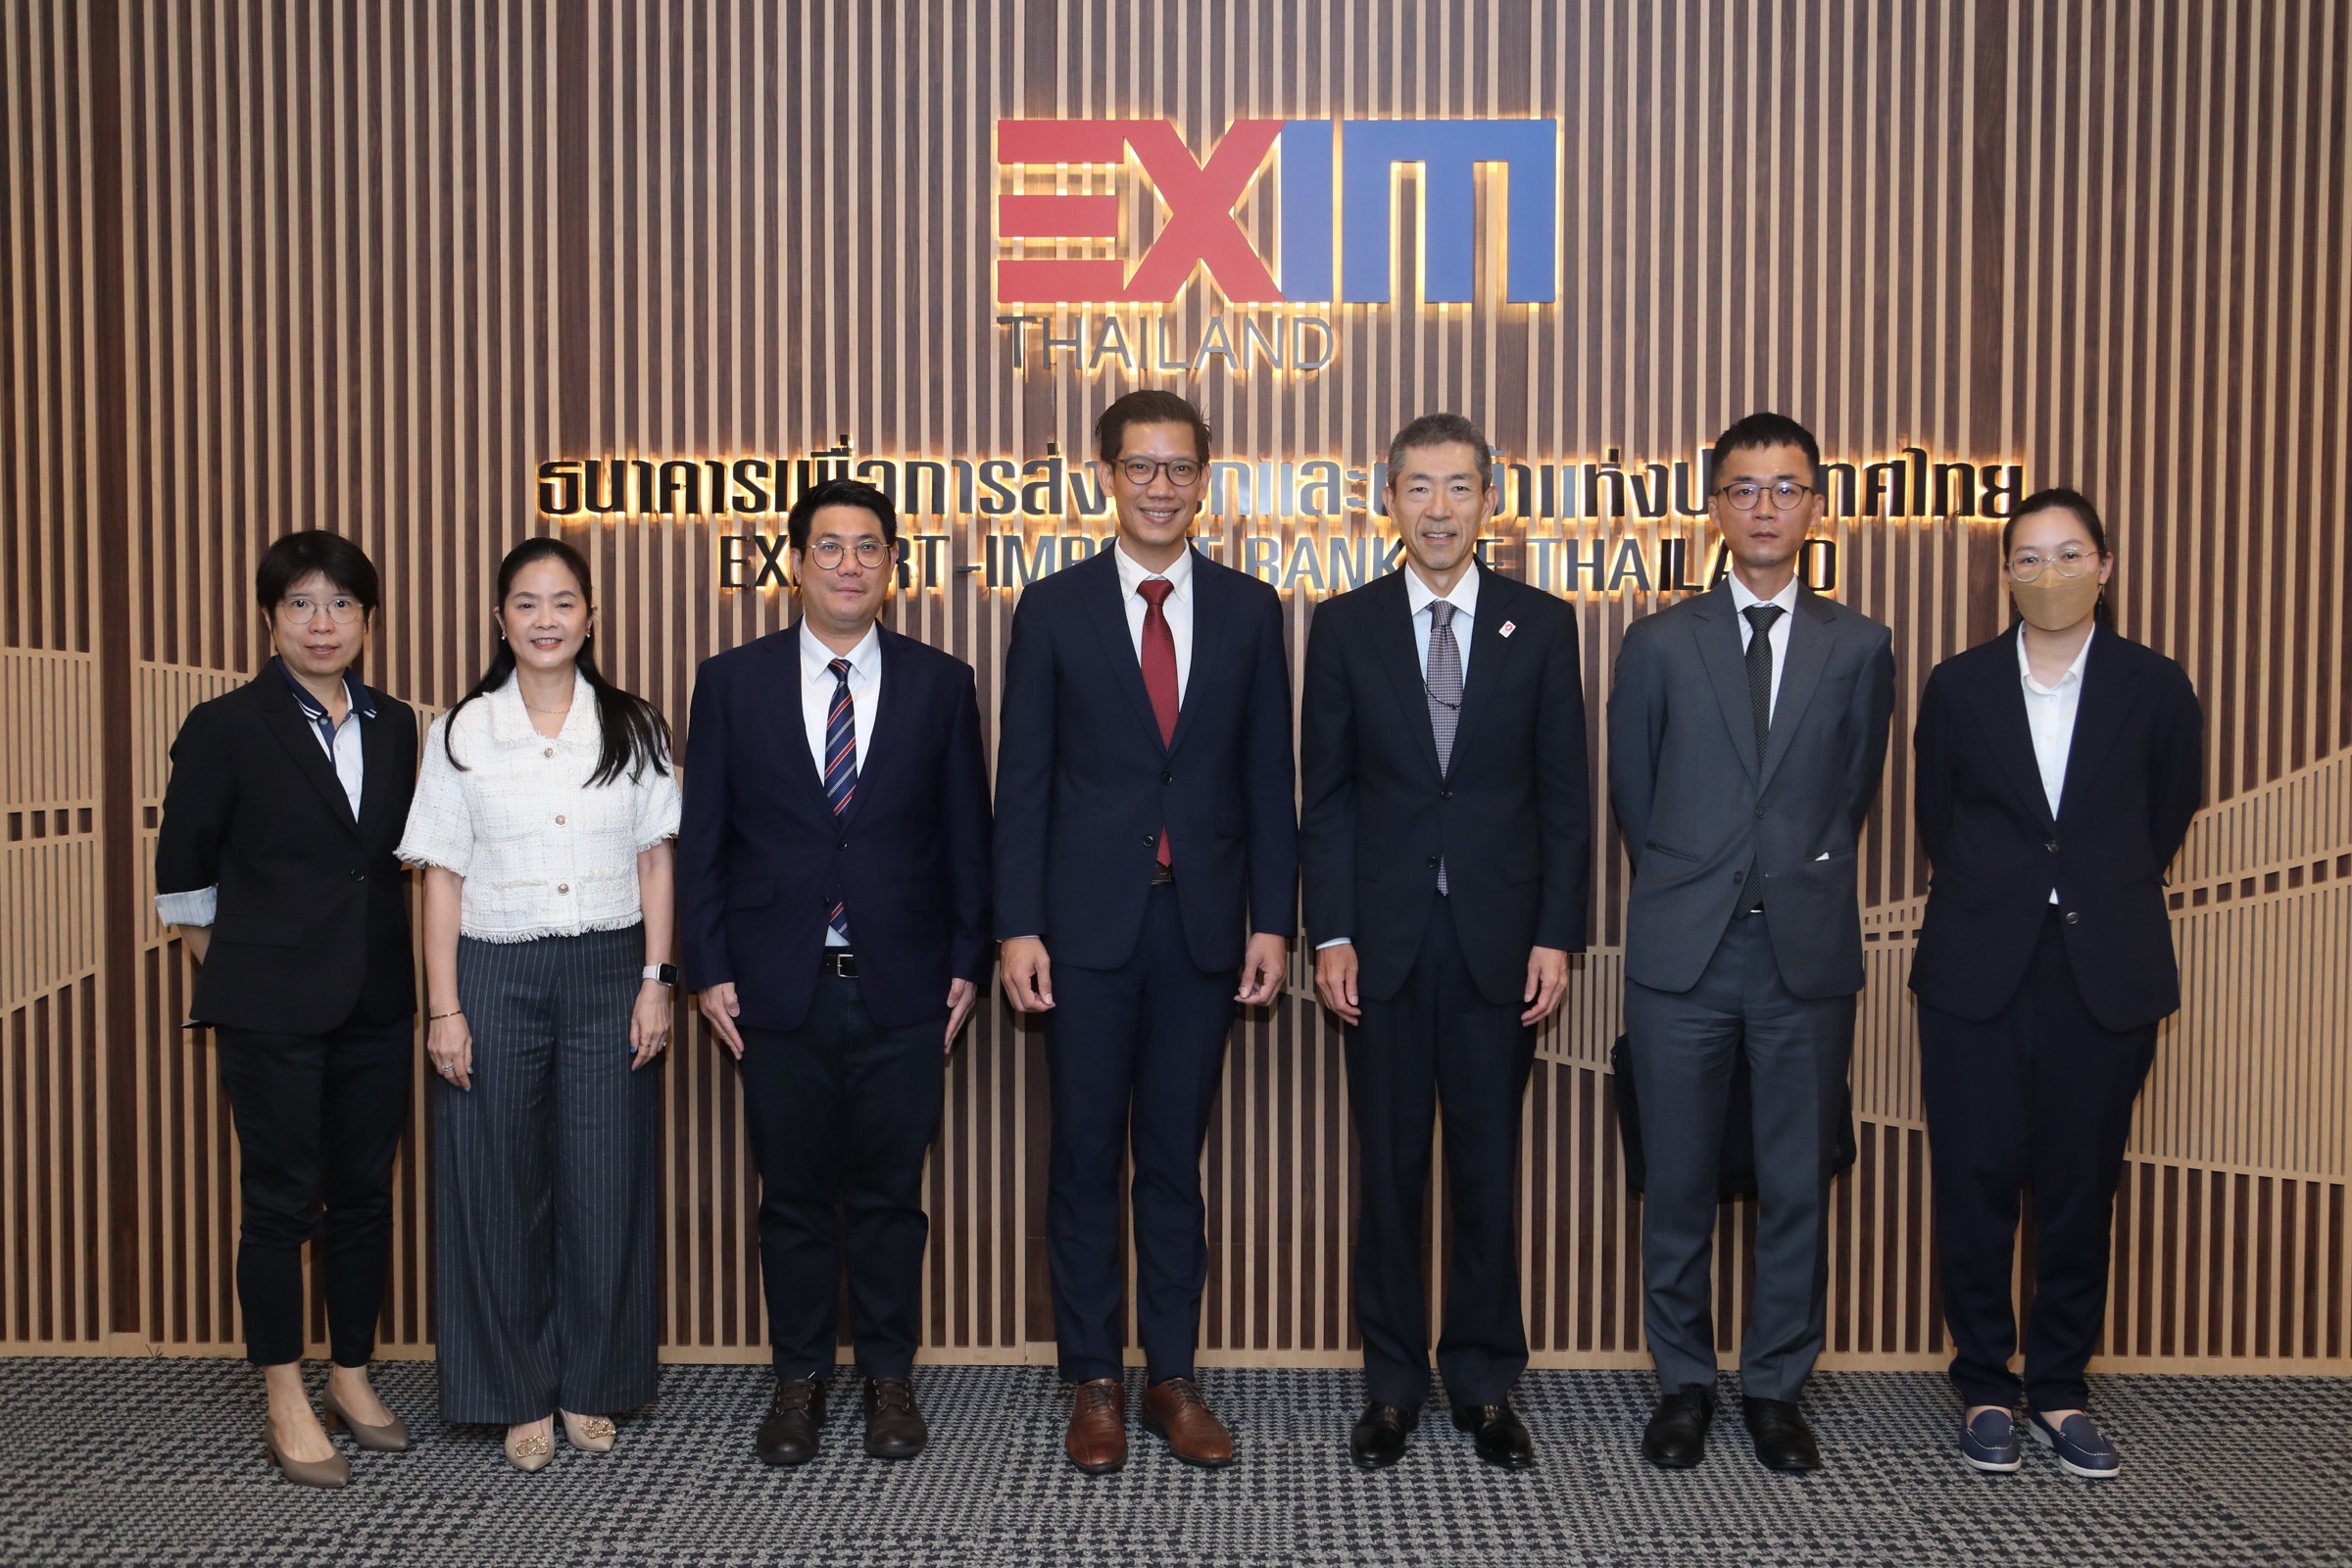 EXIM Thailand and JETRO Bangkok Explore Strategies to Enhance Support for Thai-Japanese Trade and Investment